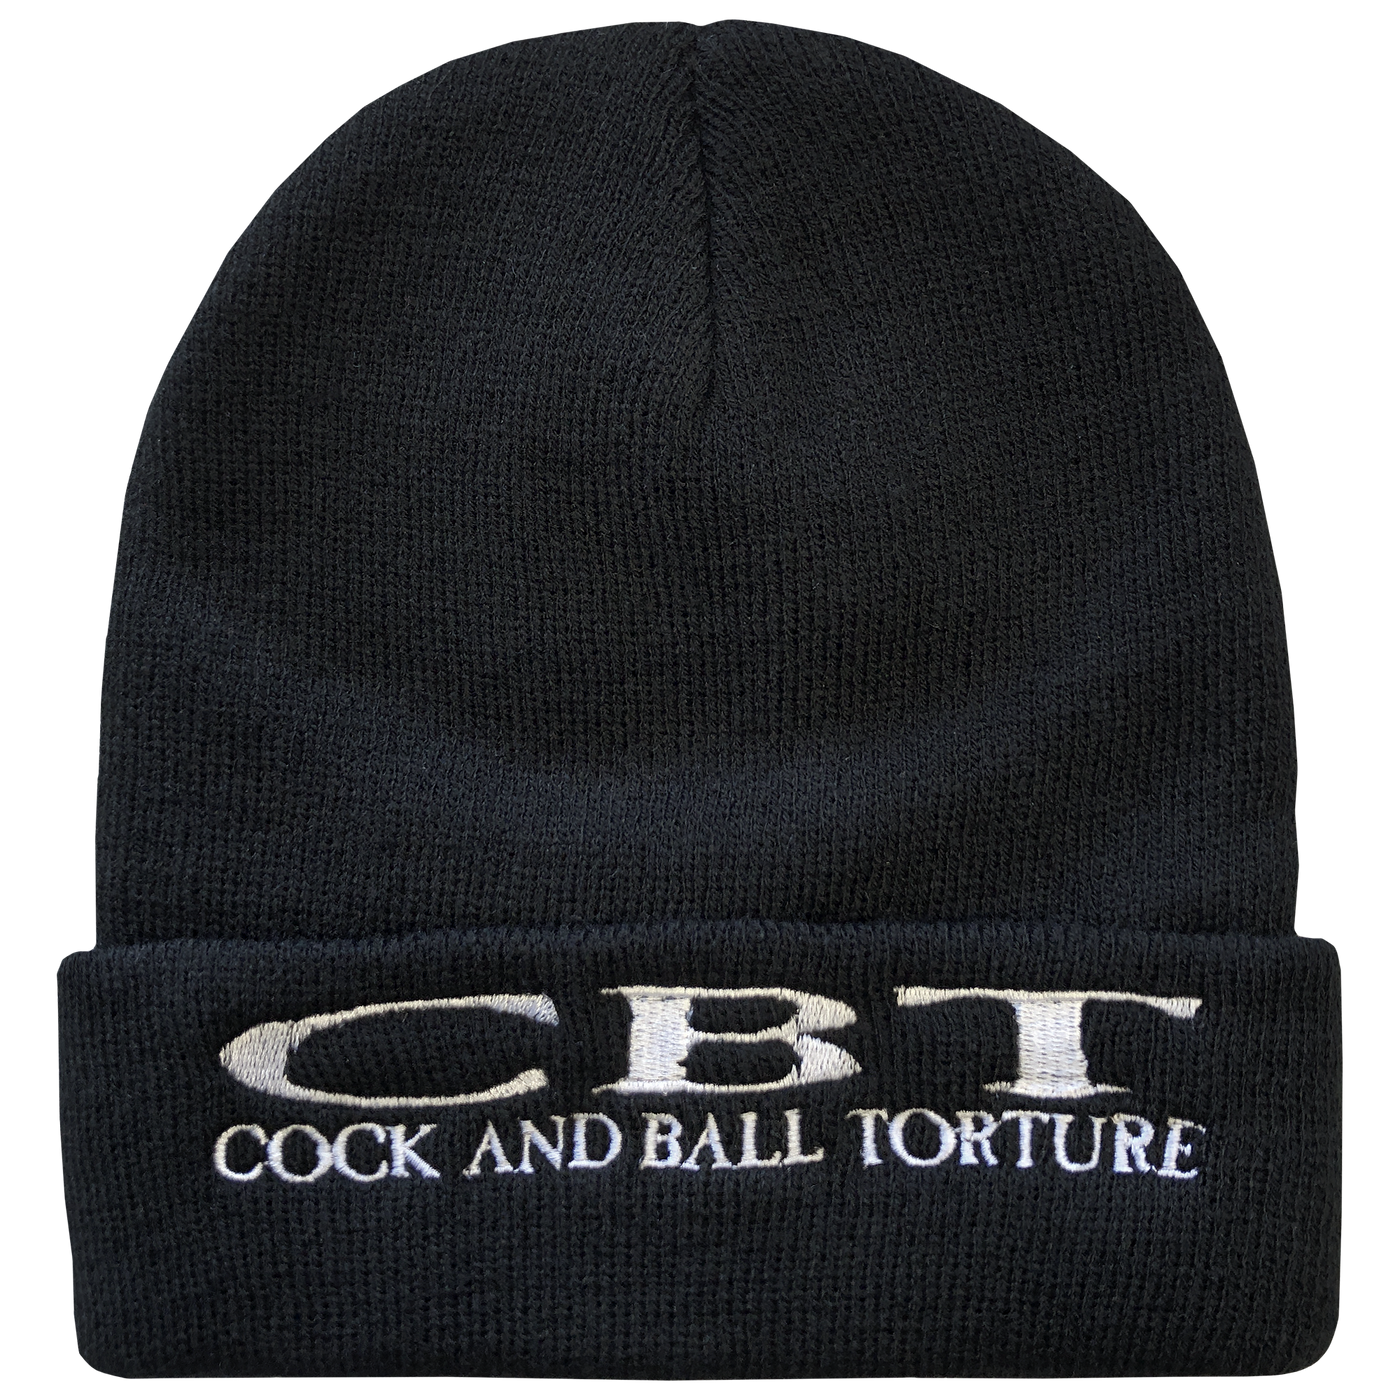 Cock And Ball Torture Beanies